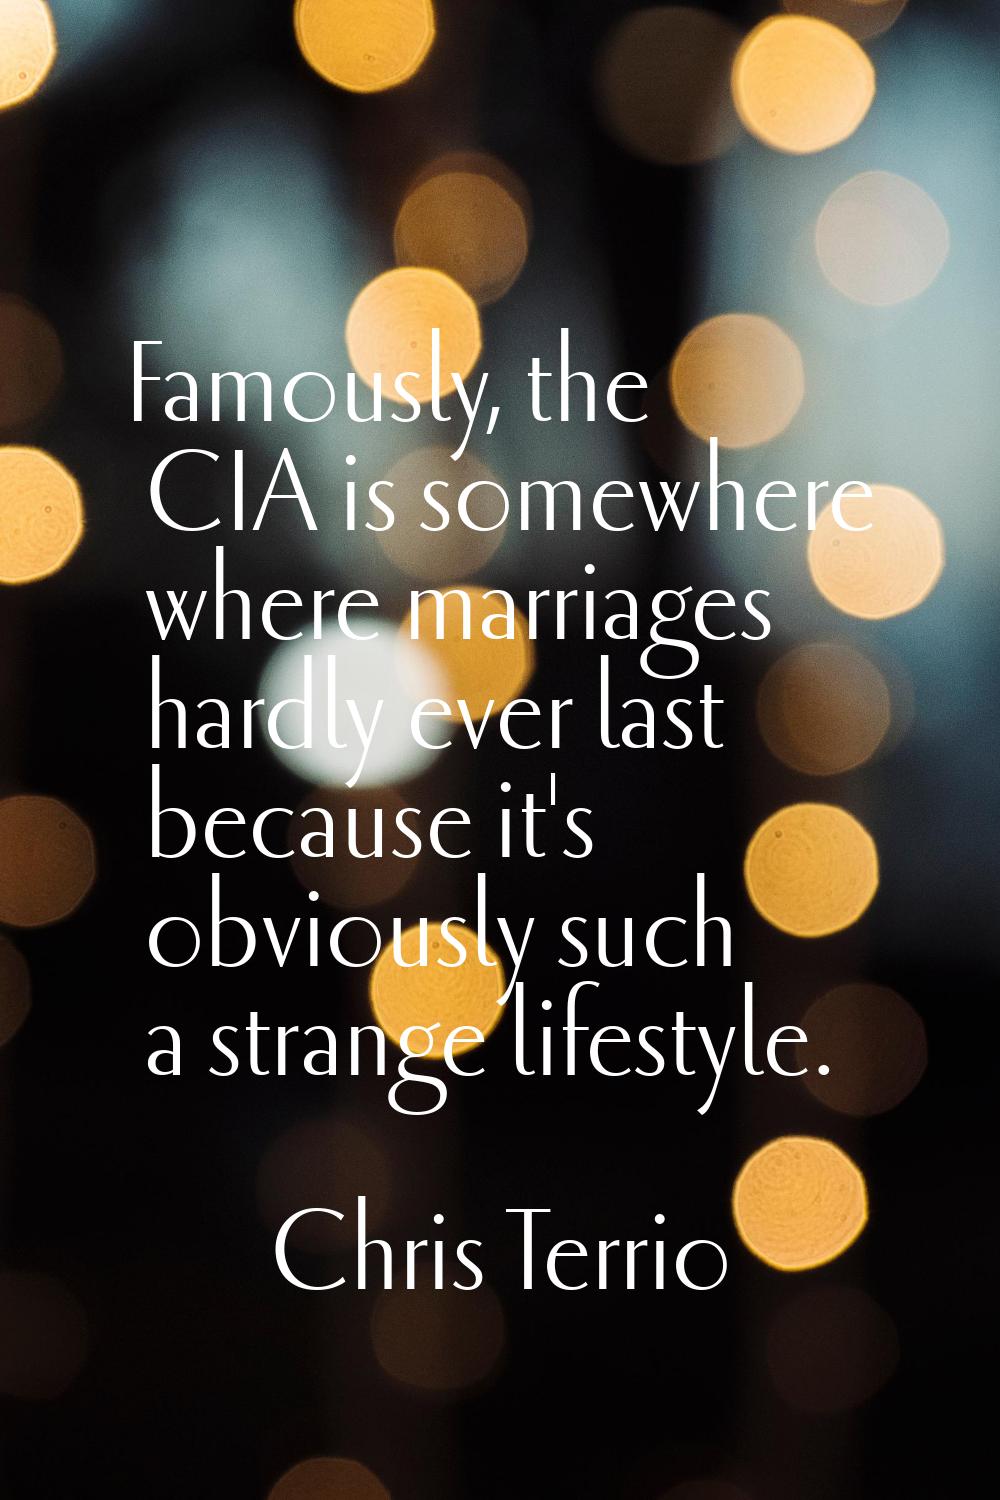 Famously, the CIA is somewhere where marriages hardly ever last because it's obviously such a stran